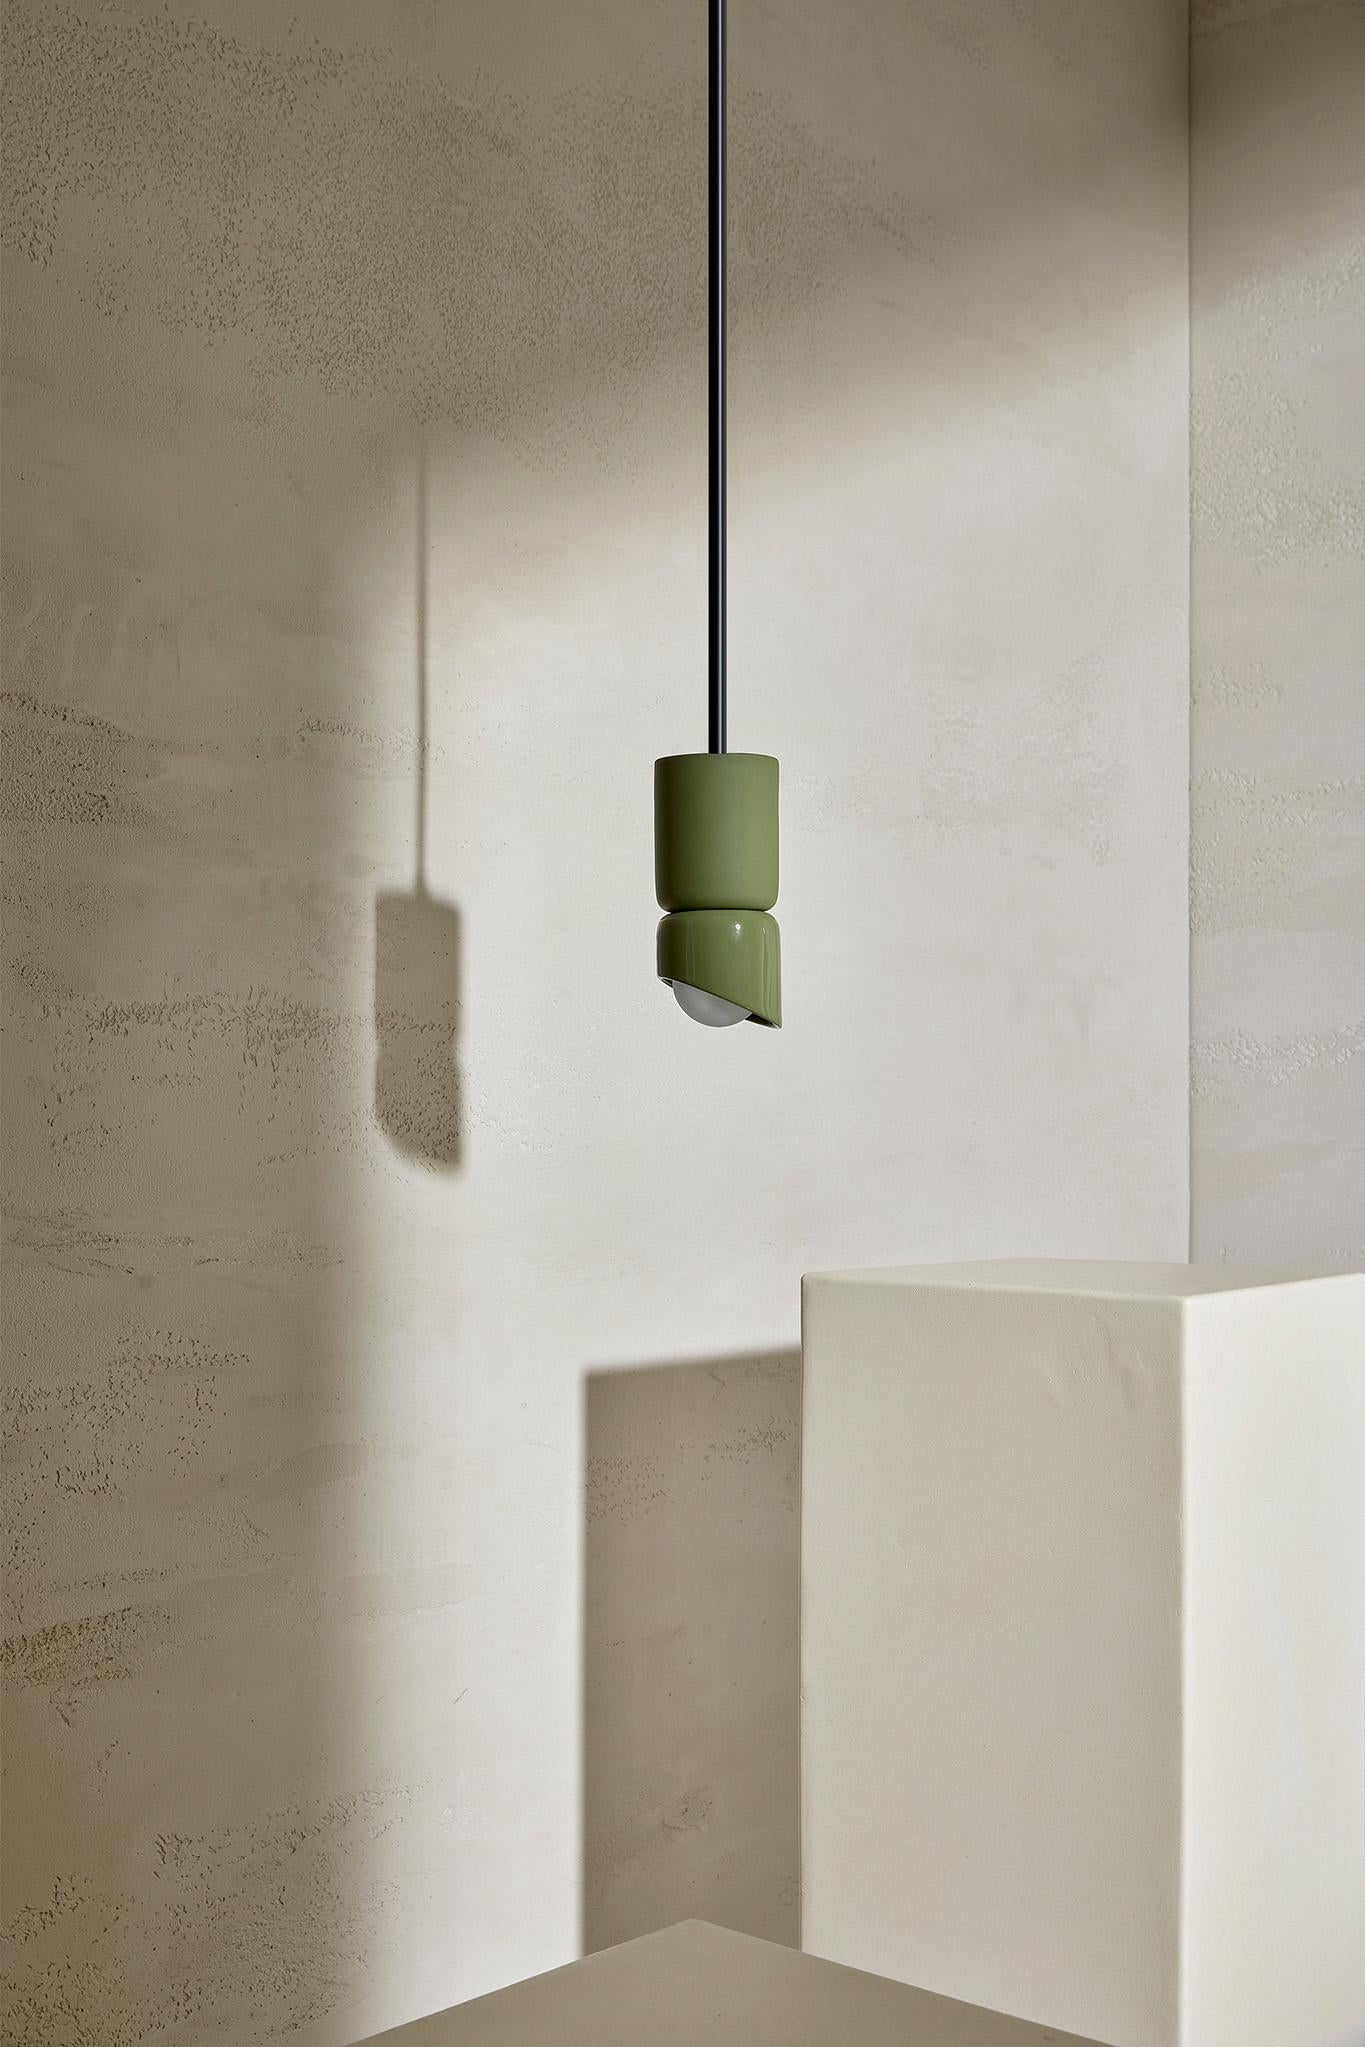 Marz Designs, “Terra 1.5 Pendant”, Ceramic Pendant Light In New Condition For Sale In BYRON BAY, NSW